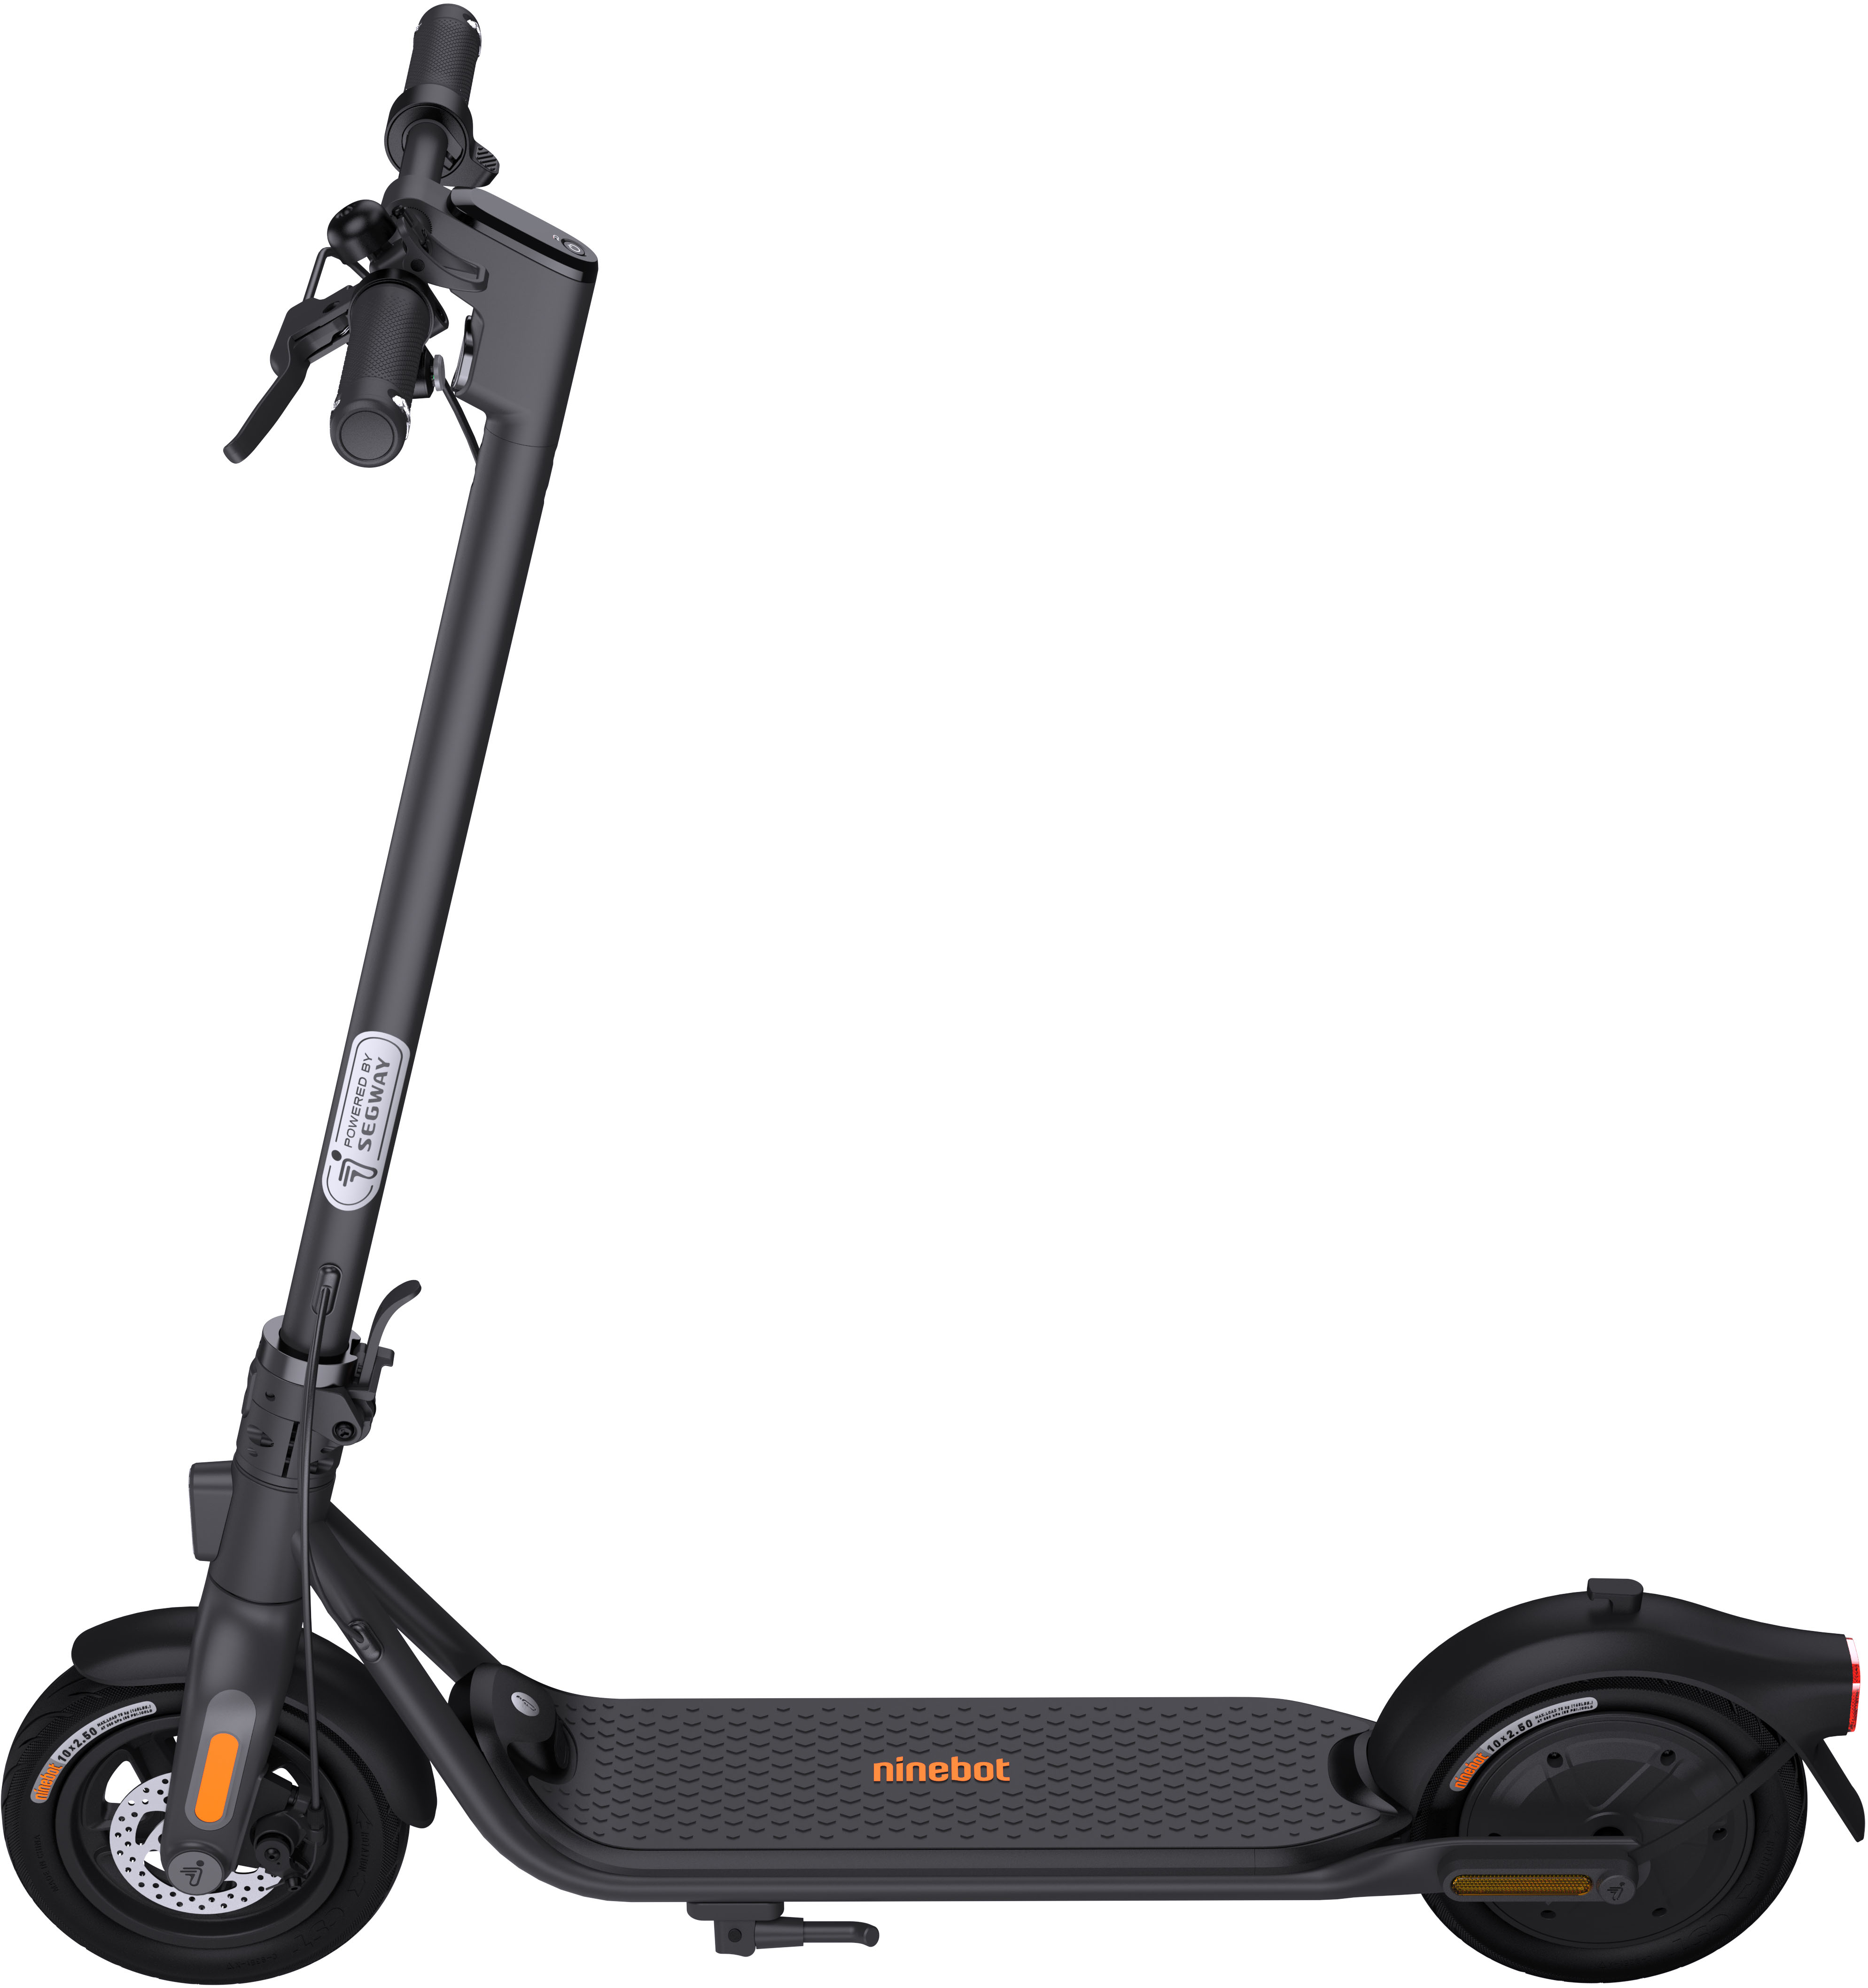 E-Scooter SEGWAY-NINEBOT Max G30 LE Engine Power: 350 W Max. Engine Power:  700 W Max. Reach: 40 km Max. Speed: 25 km/h Charging Time: 6,5 h Battery  Capacity: 36V 376 Wh Weight